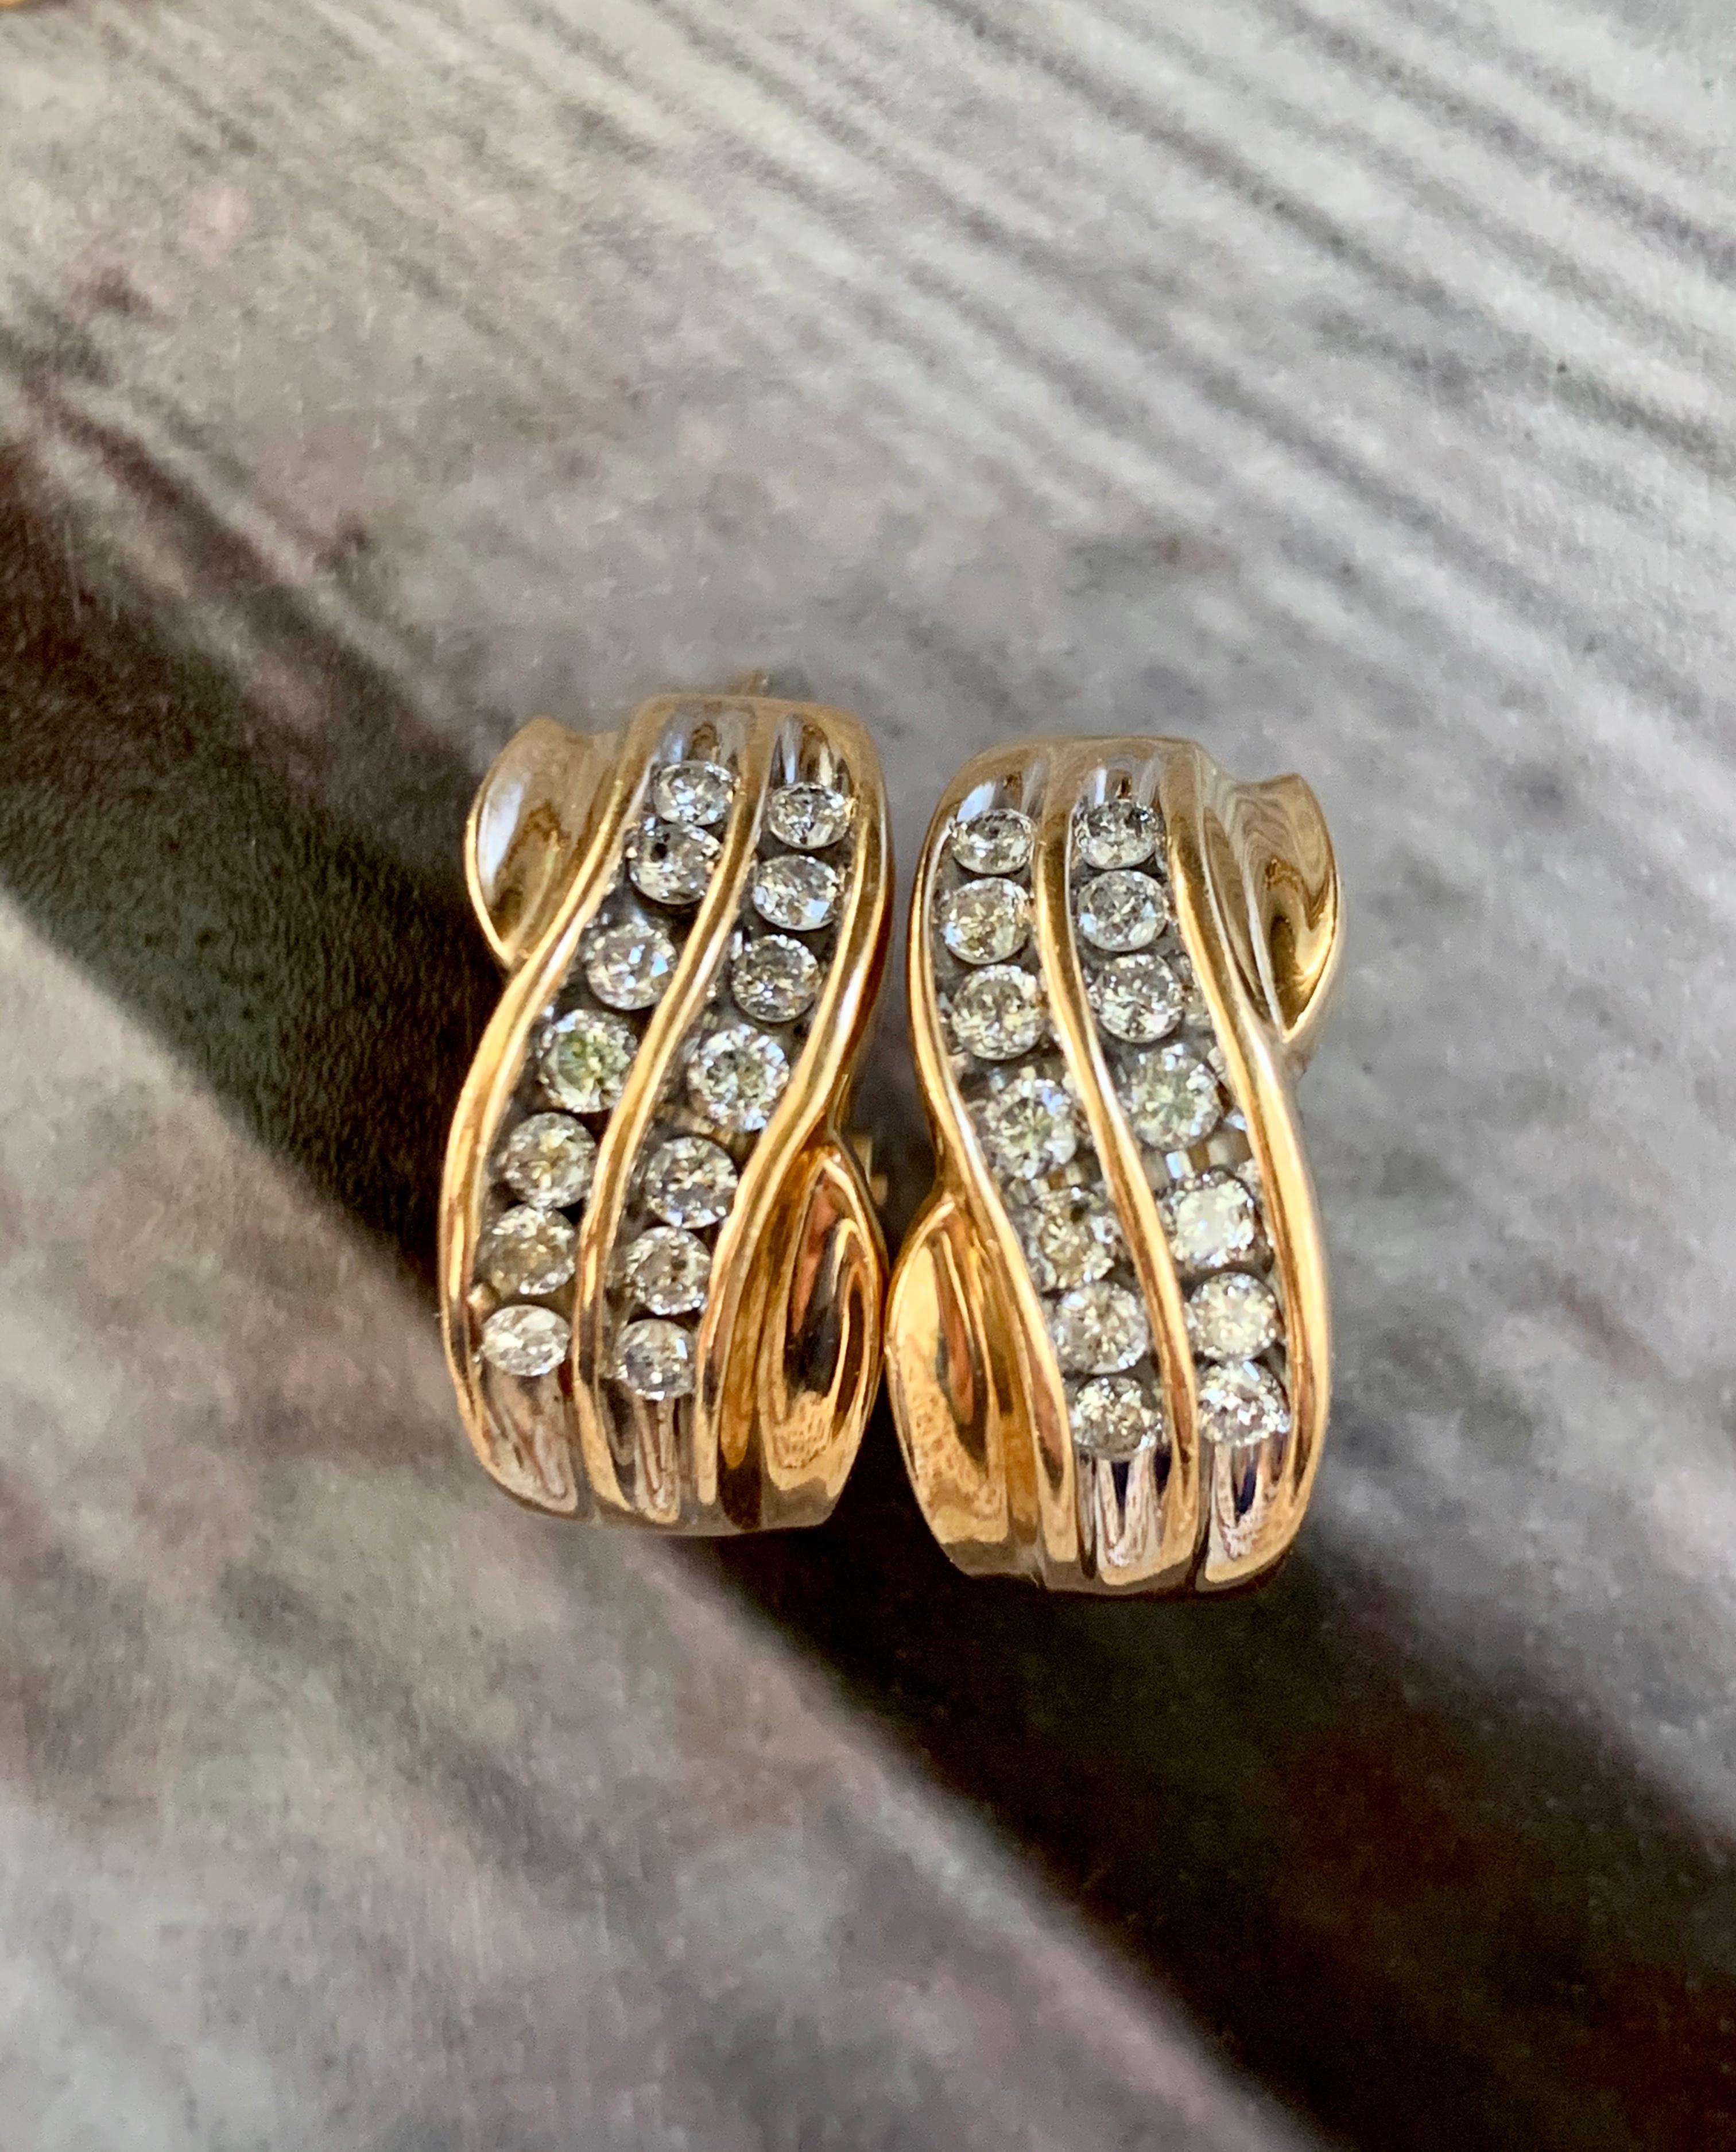 These lovely earrings are a nice twist on the traditional hoop earrings.  They feature 28 - 2.5mm brilliant cut Diamonds with a total weight of approximately 1.5ctw.  Grades are I(1)-I(2) for clarity and H for color.
the diamonds are set in two wavy